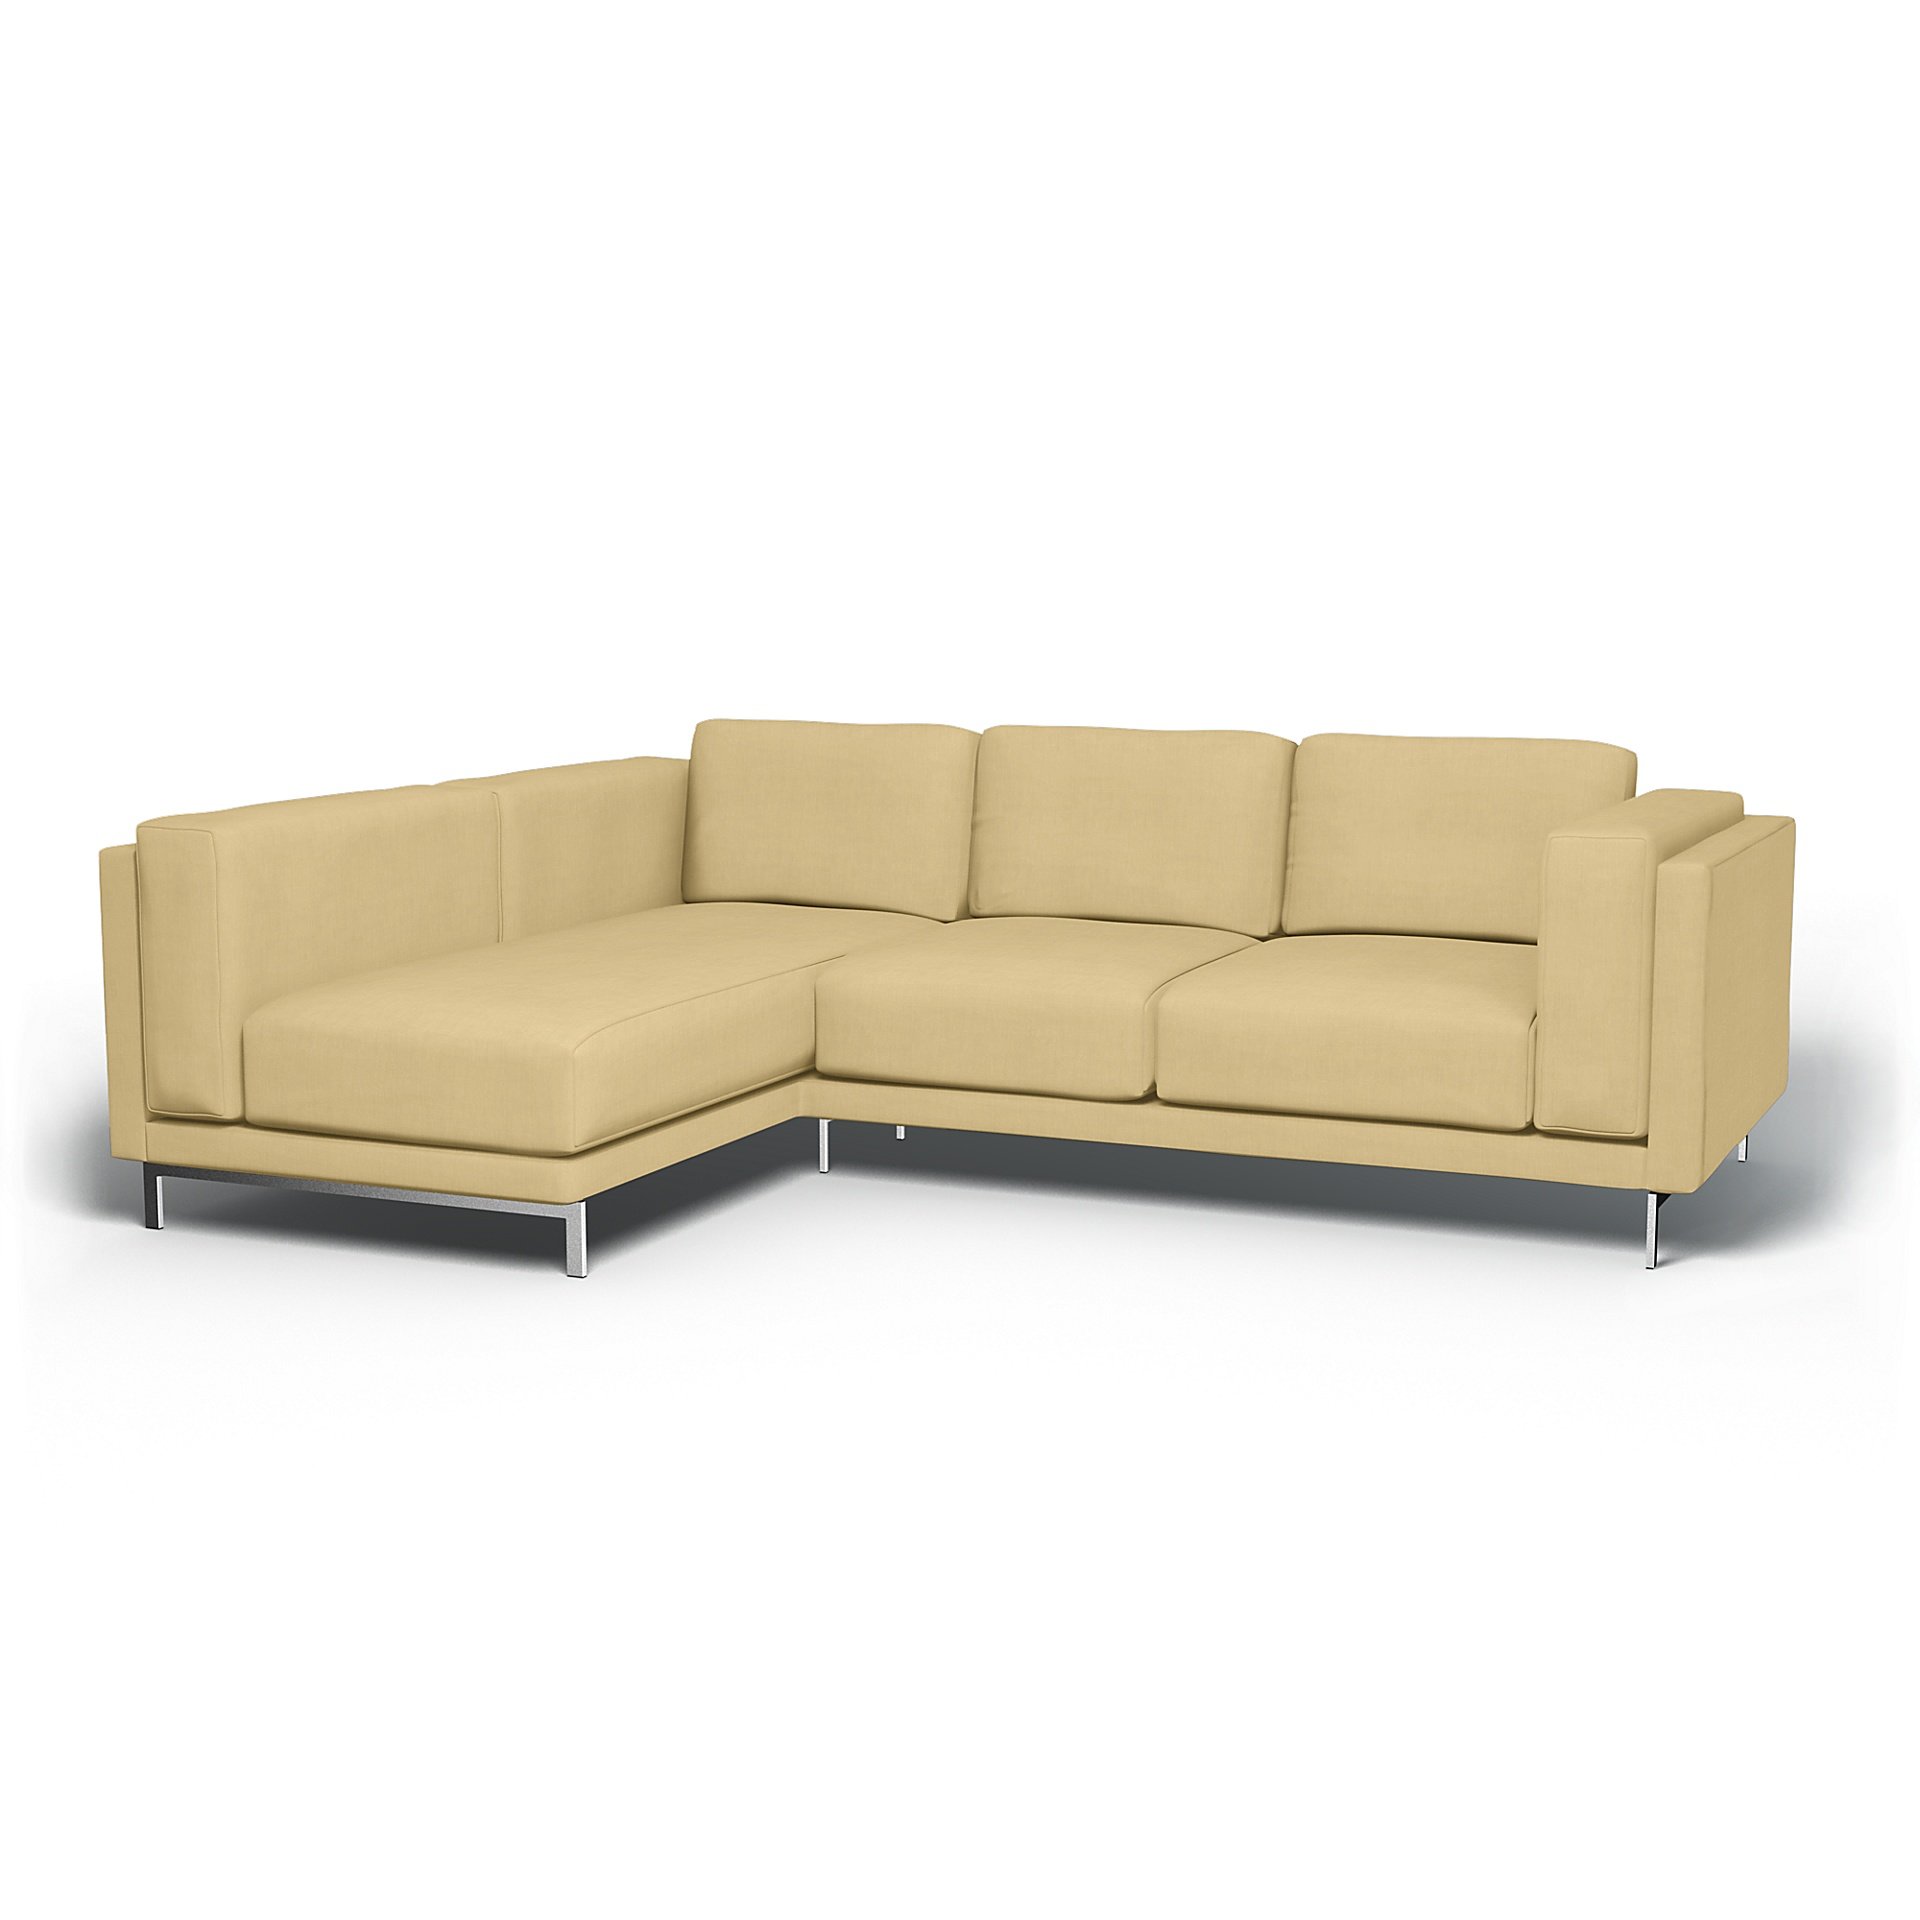 IKEA - Nockeby 3 Seater Sofa with Left Chaise Cover, Straw Yellow, Linen - Bemz